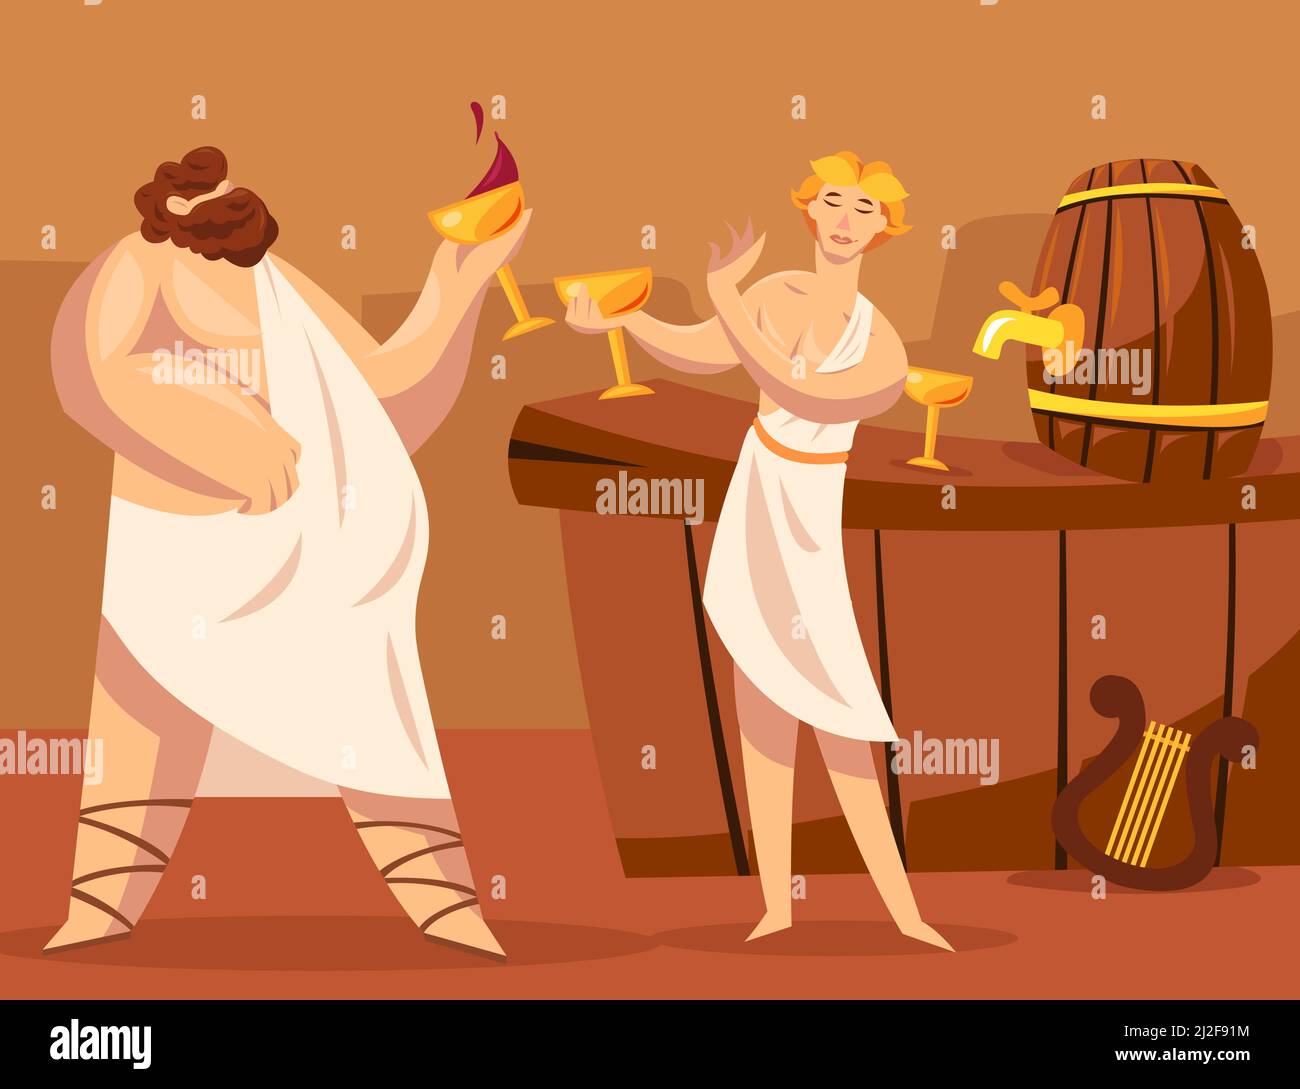 Ancient Greek gods or Greeks drinking wine together. Cartoon vector illustration. God of viticulture Dionysus granting wine to Greek character. Winema Stock Vector